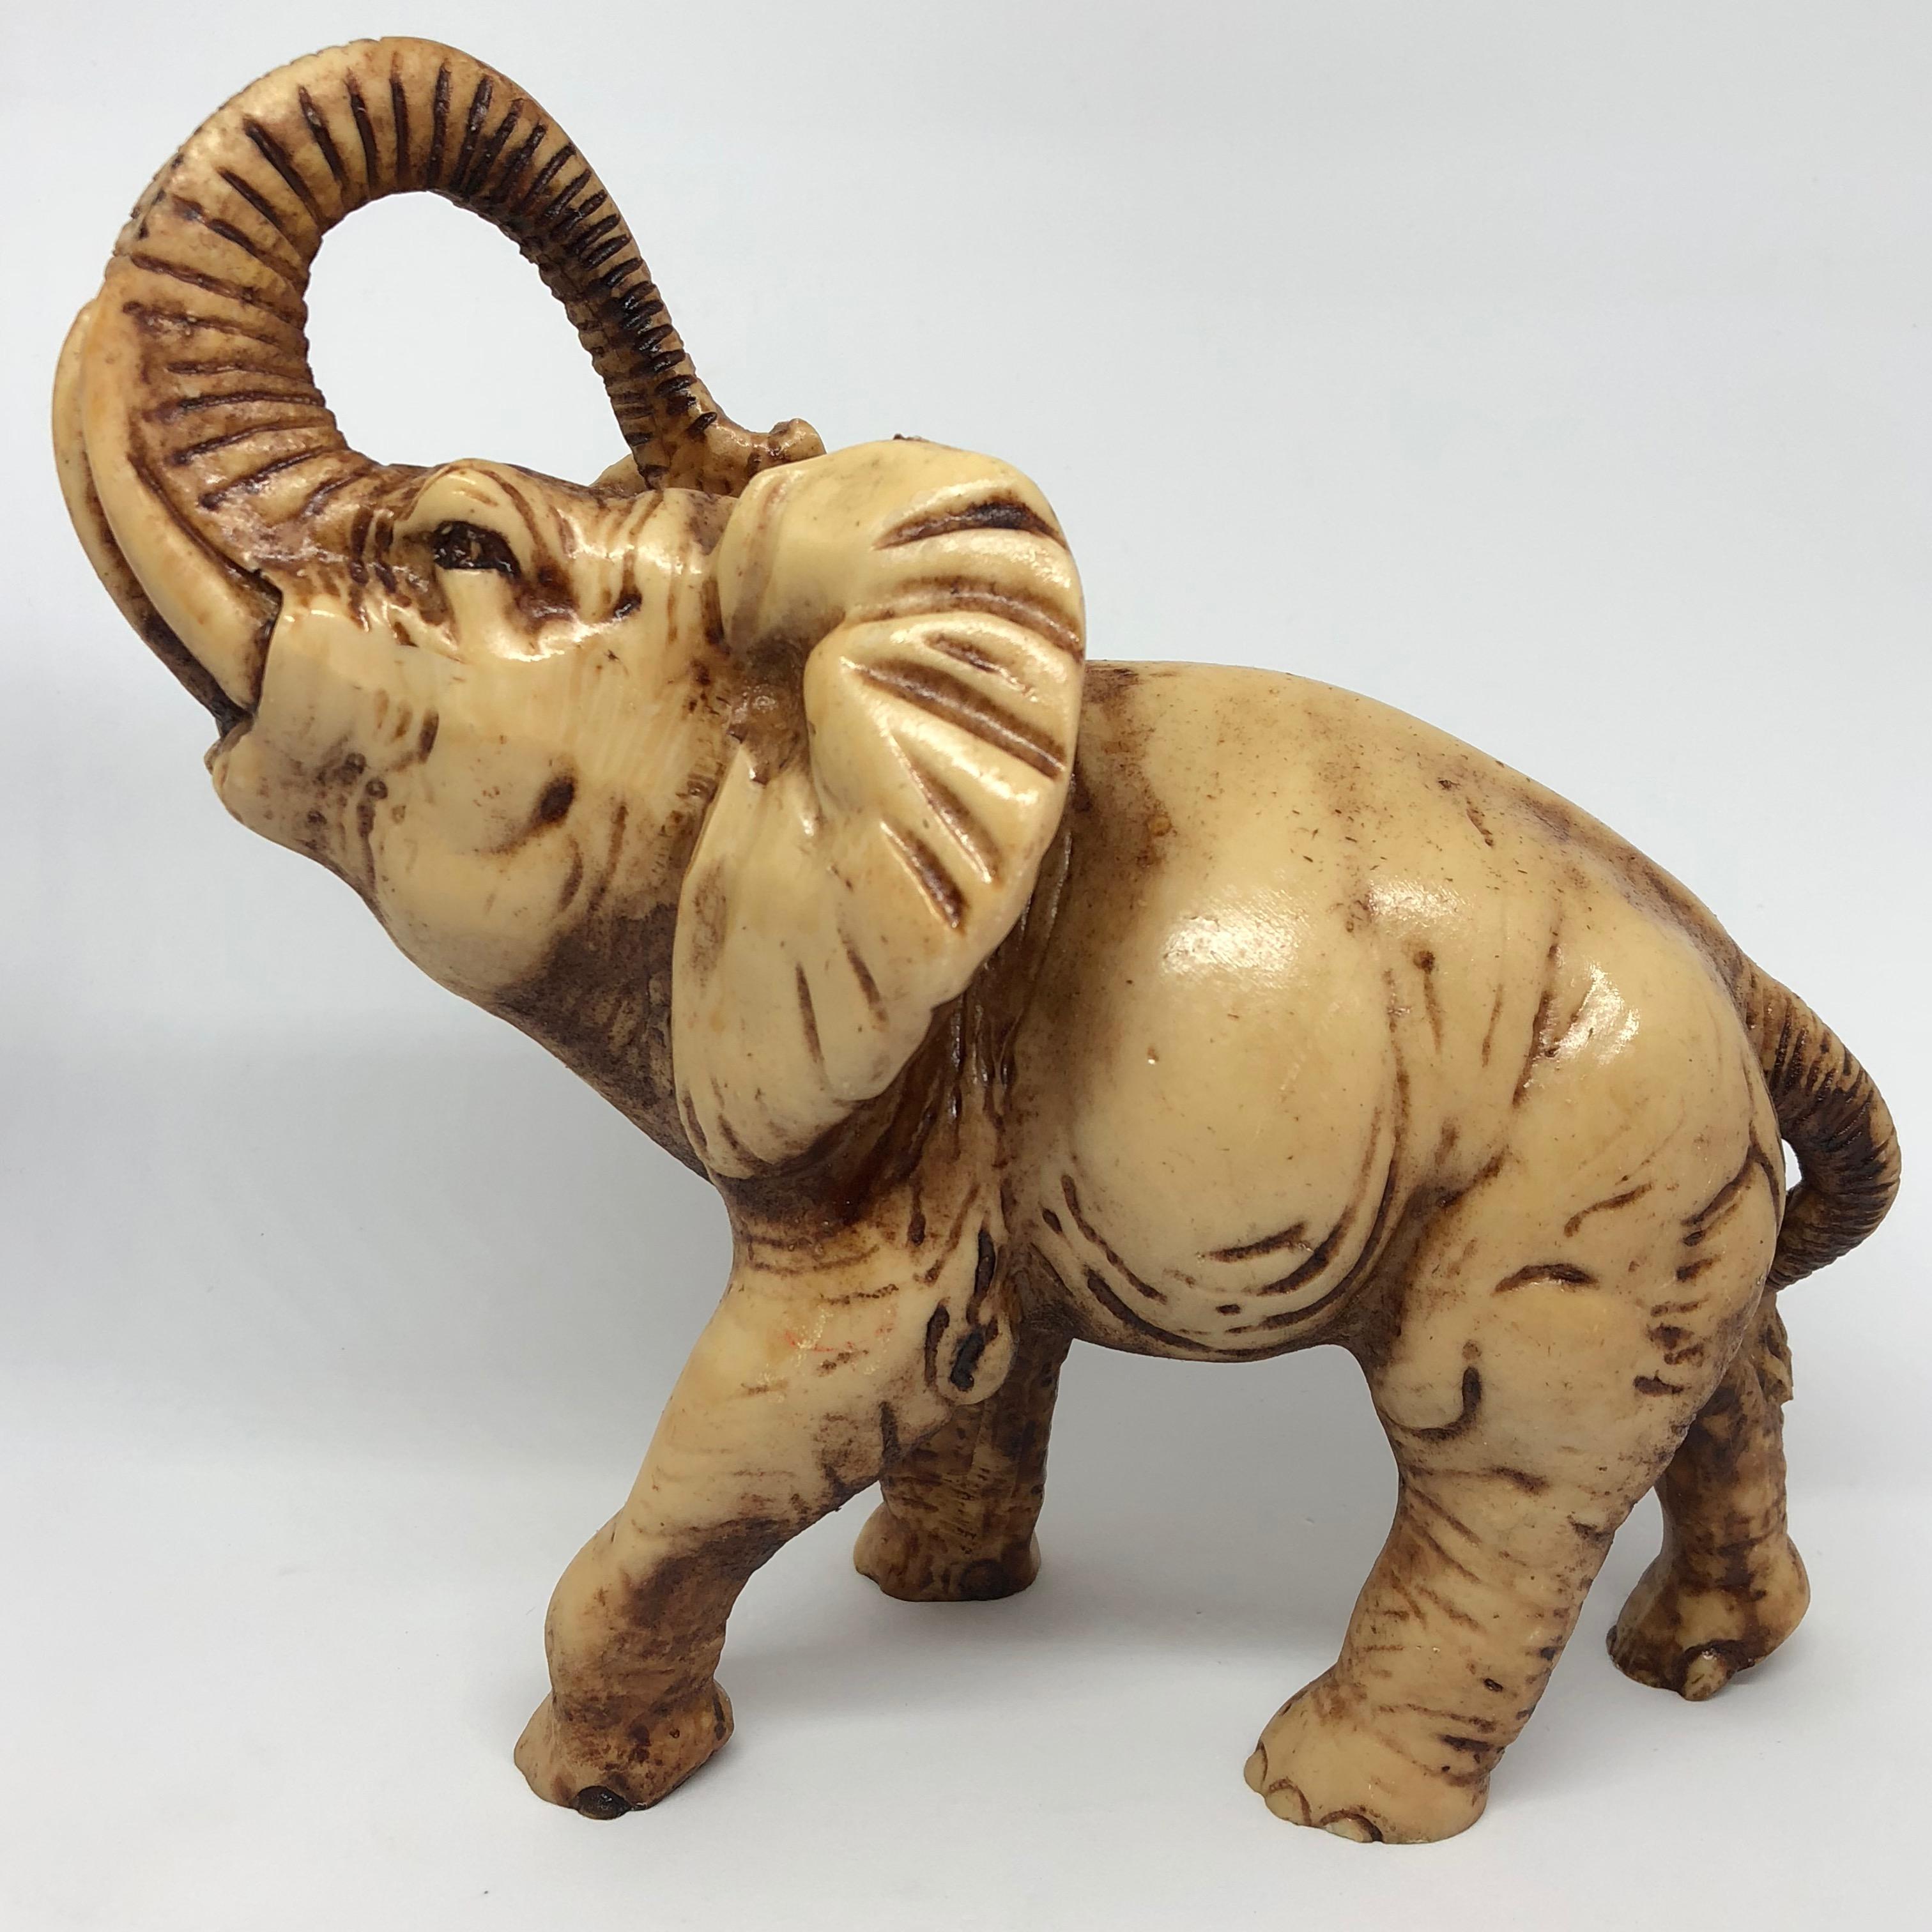 A decorative hand-carved elephant sculpture. Some wear but this is old-age. Made of a soapstone. We think it is from Europe and was made in the 1970s.